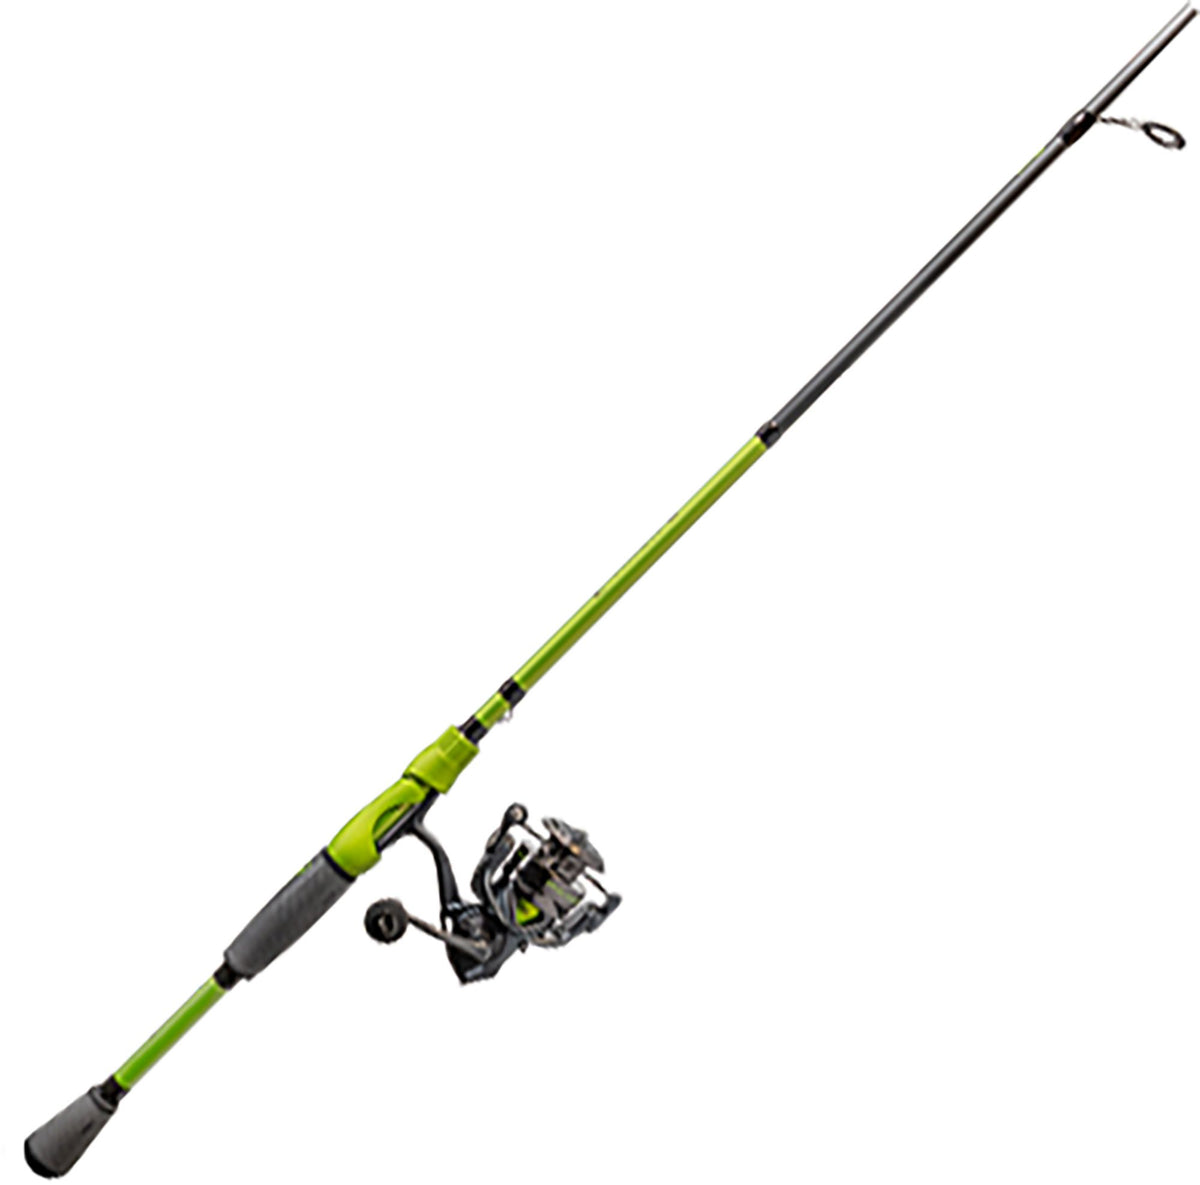 Lews Spinning Combo Mach 2 - 7'2'' MH 1pc